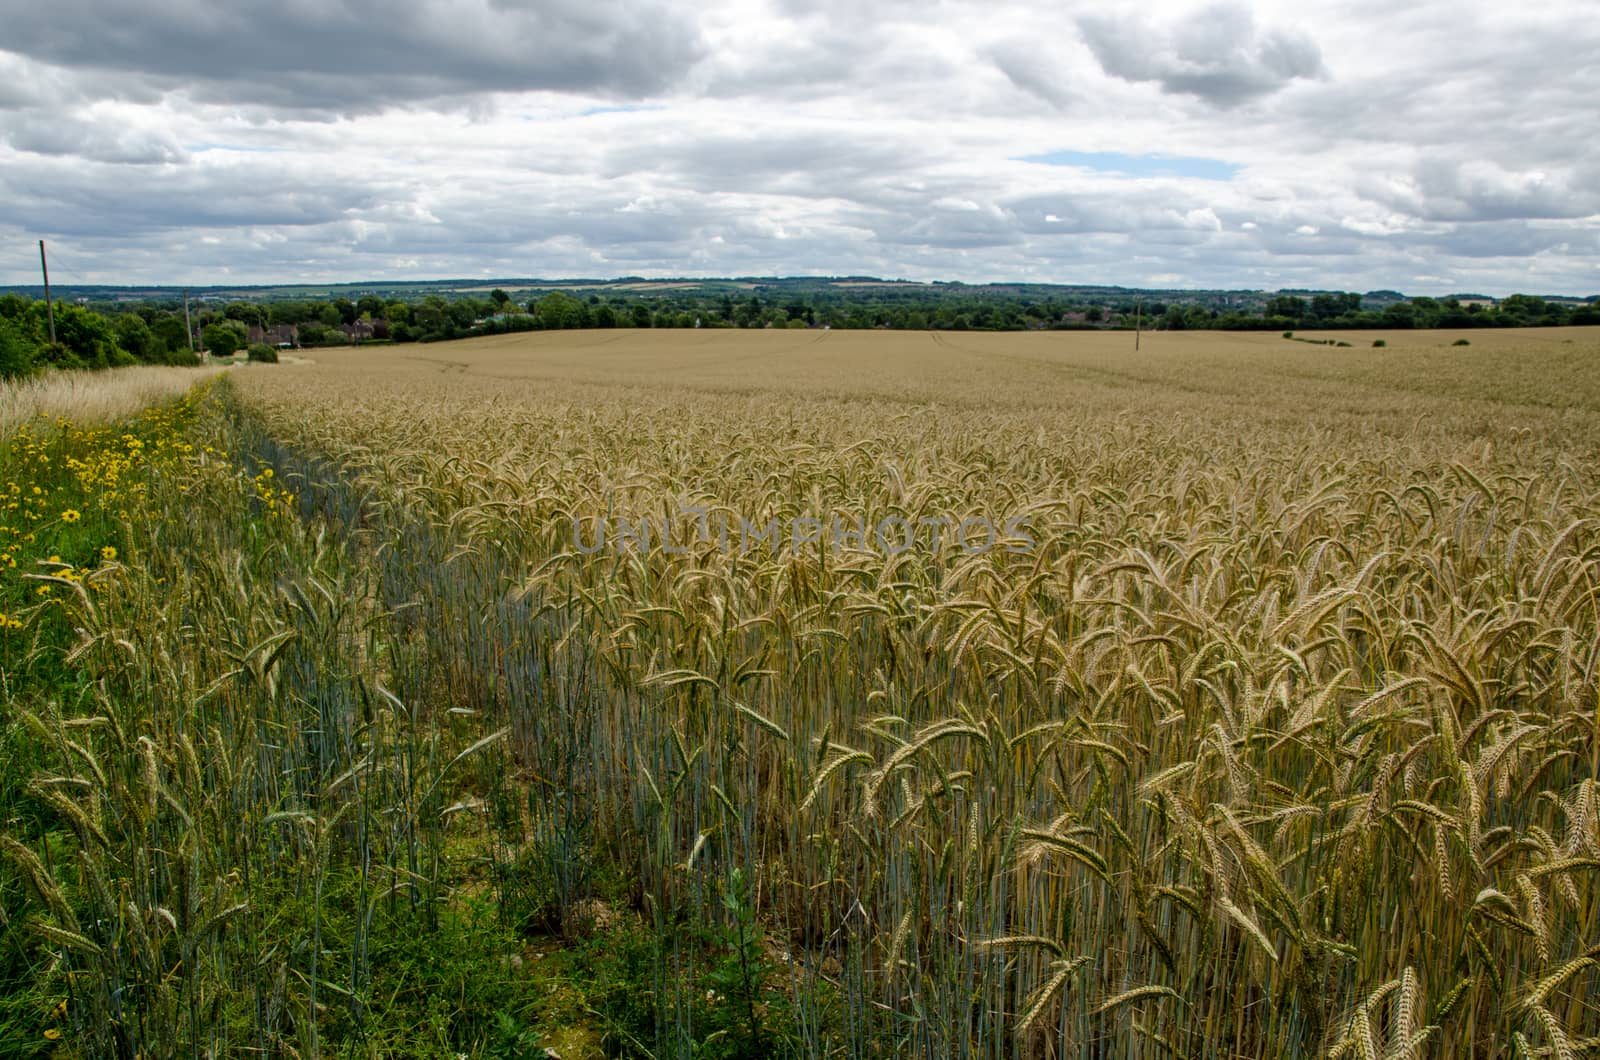 View across a field of ripening corn looking towards the Hampshire town of Basingstoke on a summer day.  The farmland - part of the Manydown Estate - is due to become a housing development.